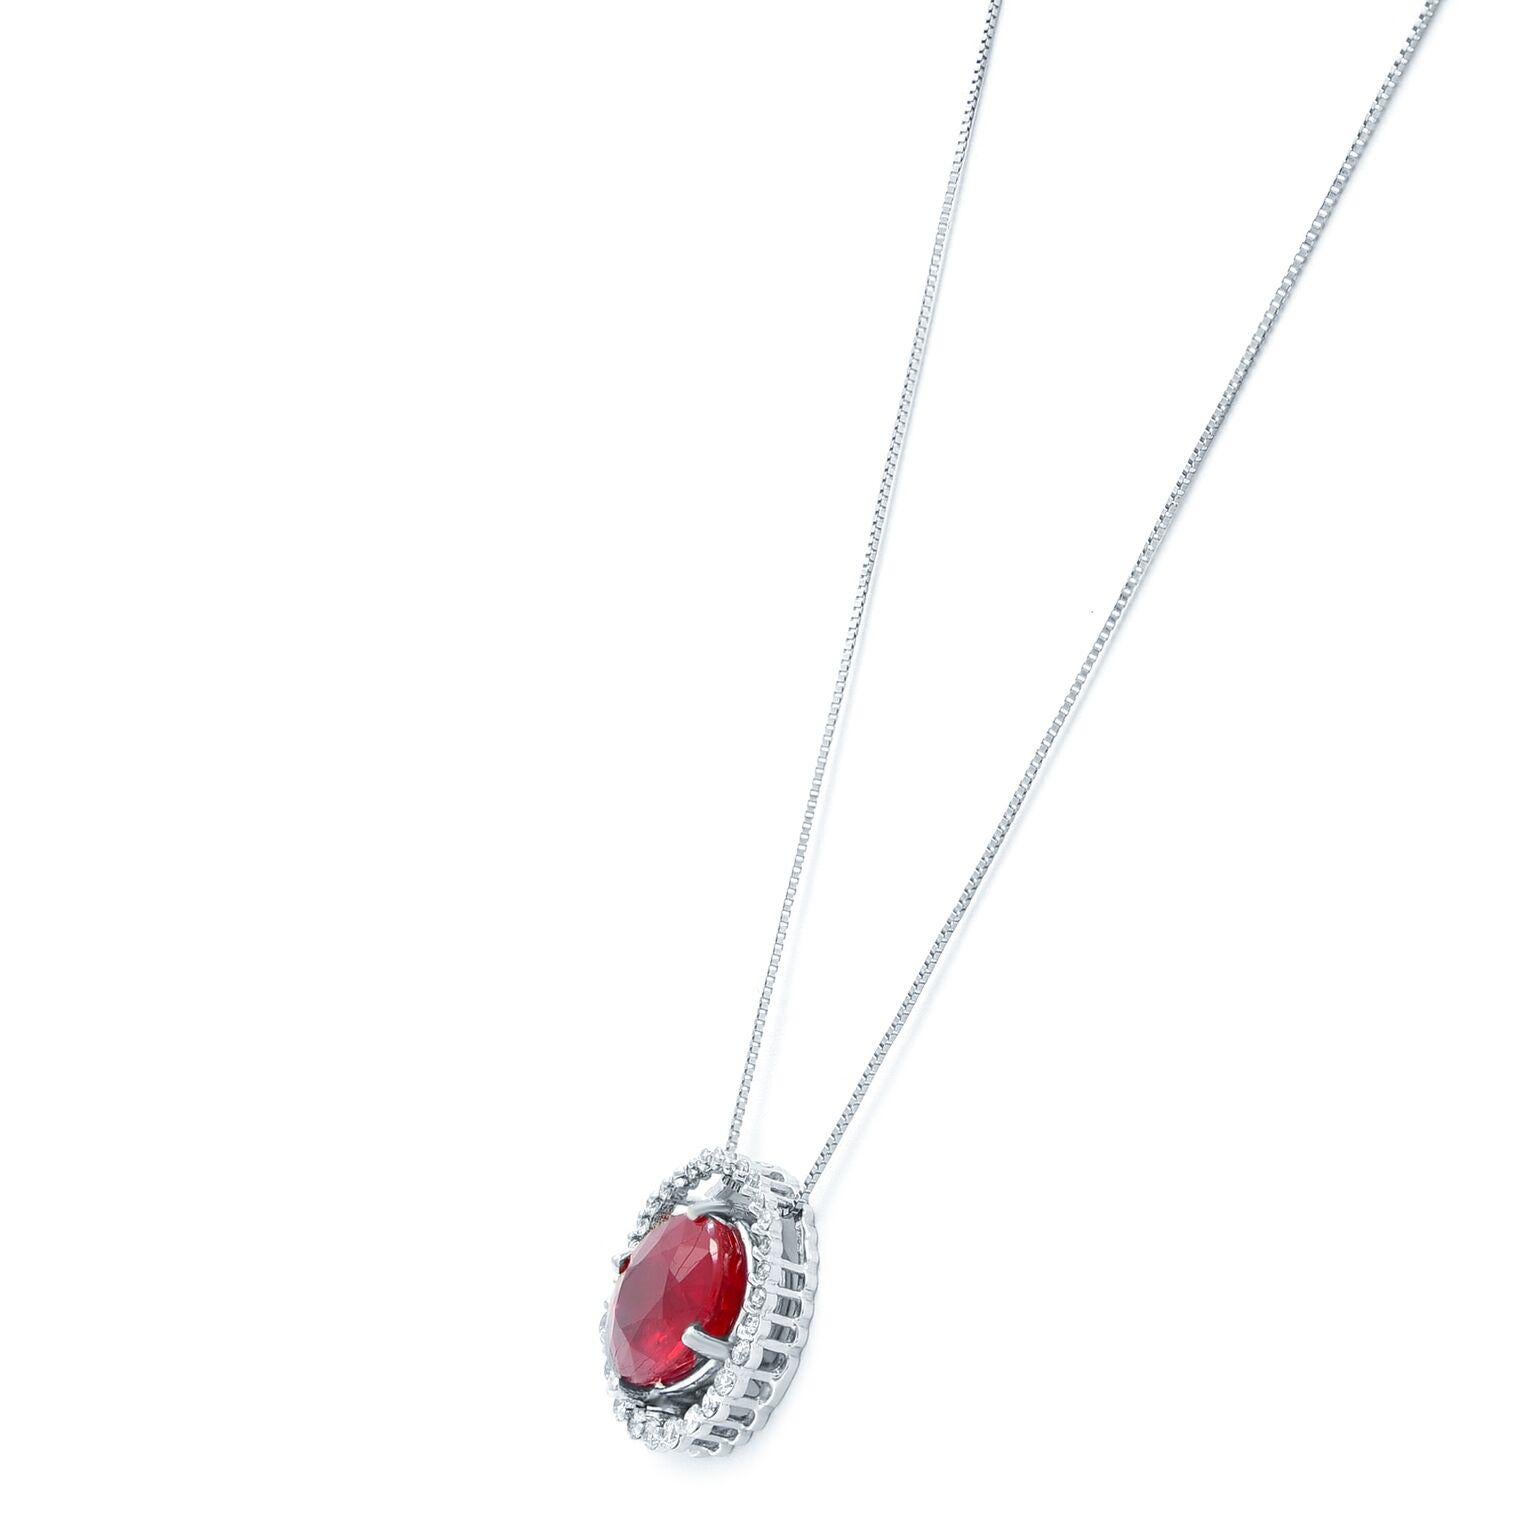 This gorgeous diamond ruby pendant necklace is crafted in 14K white gold. The pendant is set with 0.50ct of round cut natural diamonds and 7 carats of deep rich prong set oval cut ruby. Diamond color F and clarity VS. Necklace length: 17 inches.